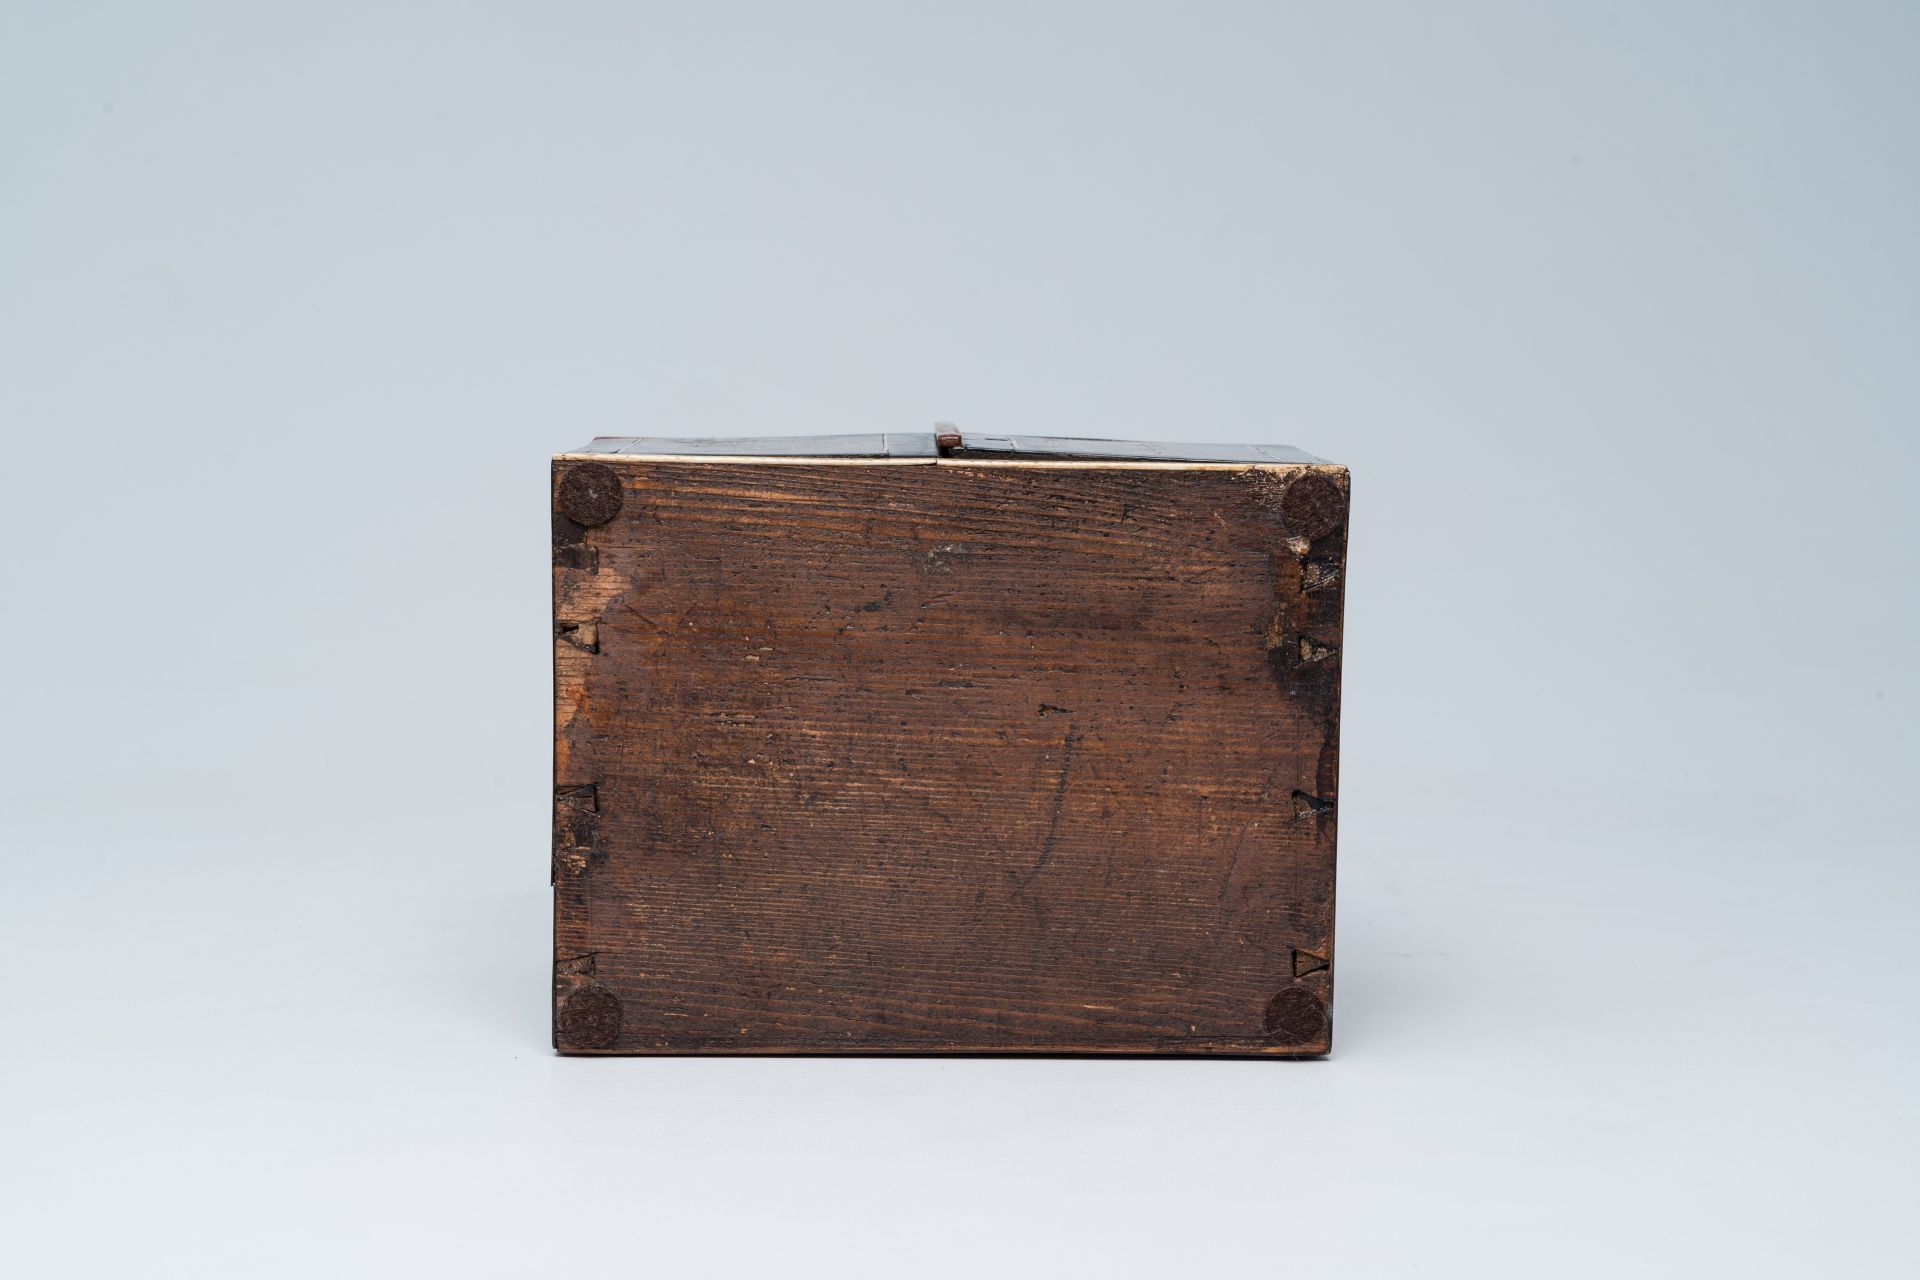 An elegant wood bone mounted miniature cabinet with figures and floral design, 17th/18th C. - Image 9 of 13